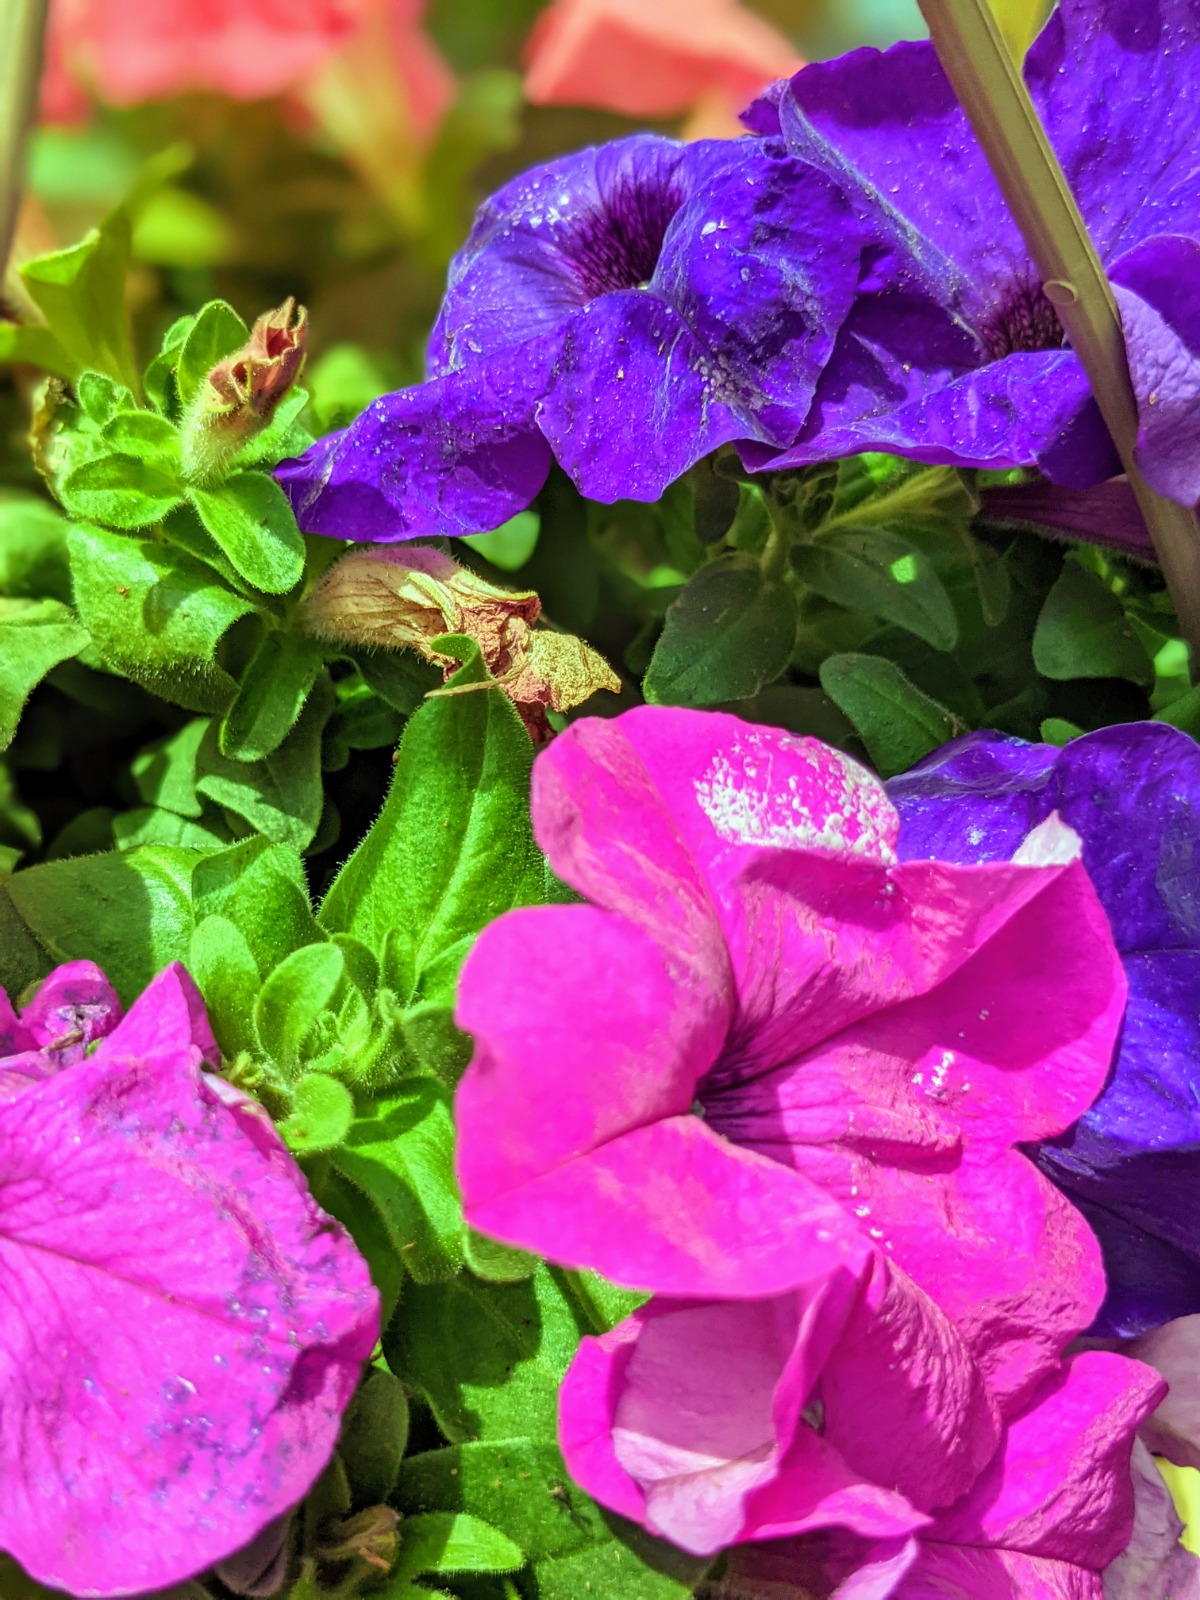 Pink and purple petunias - many flowers become more productive with deadheading.